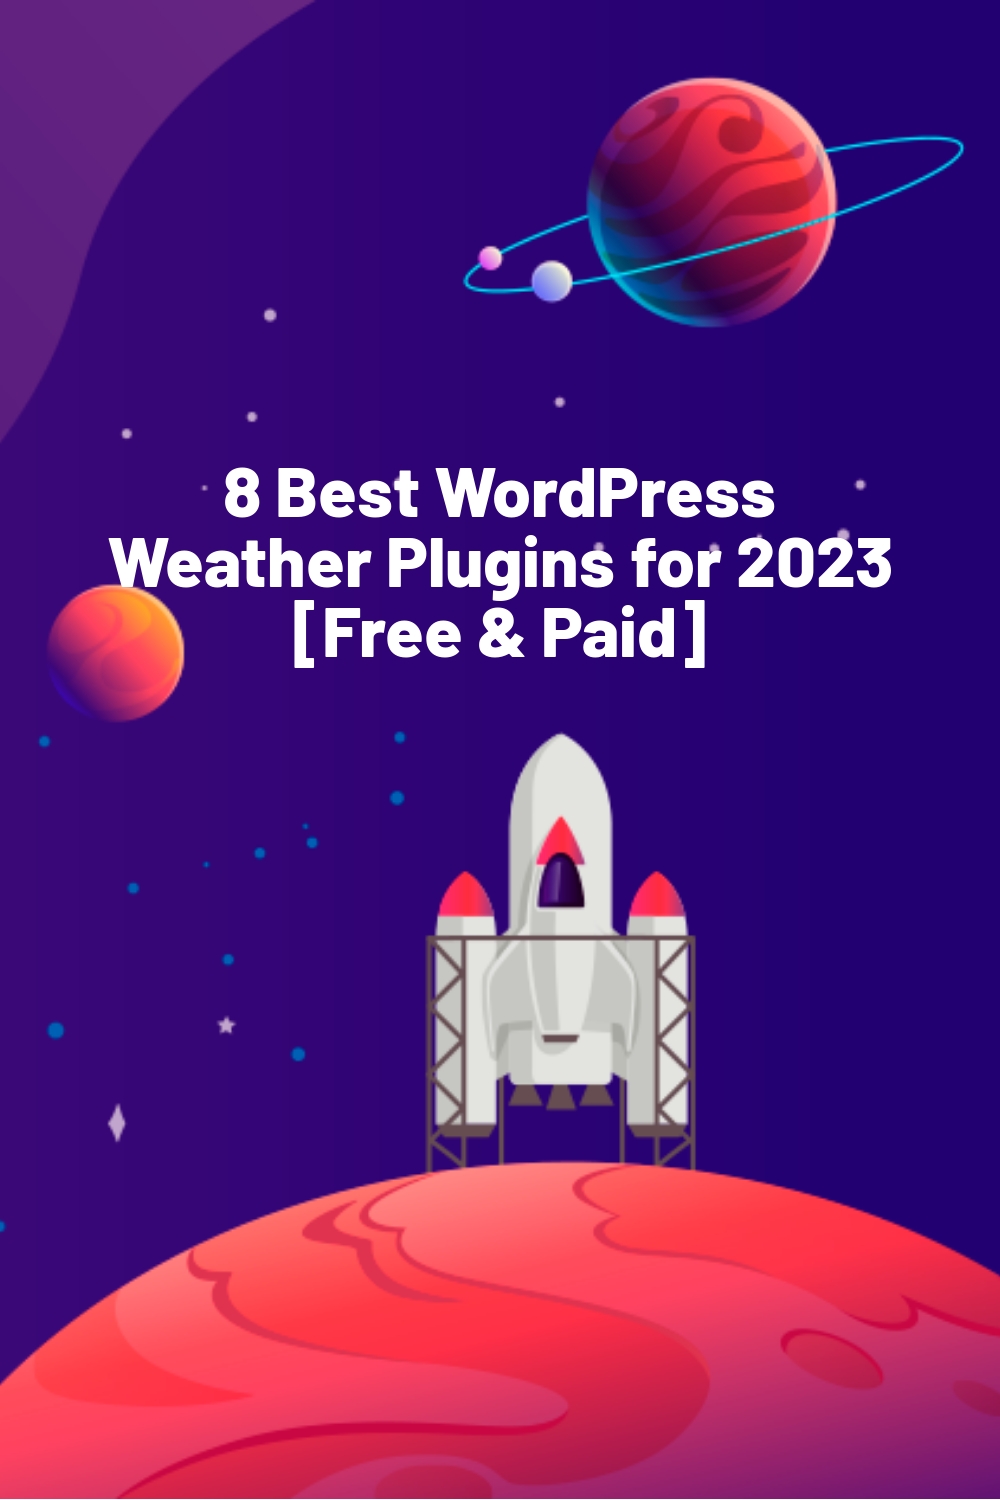 8 Best WordPress Weather Plugins for 2023 [Free & Paid]